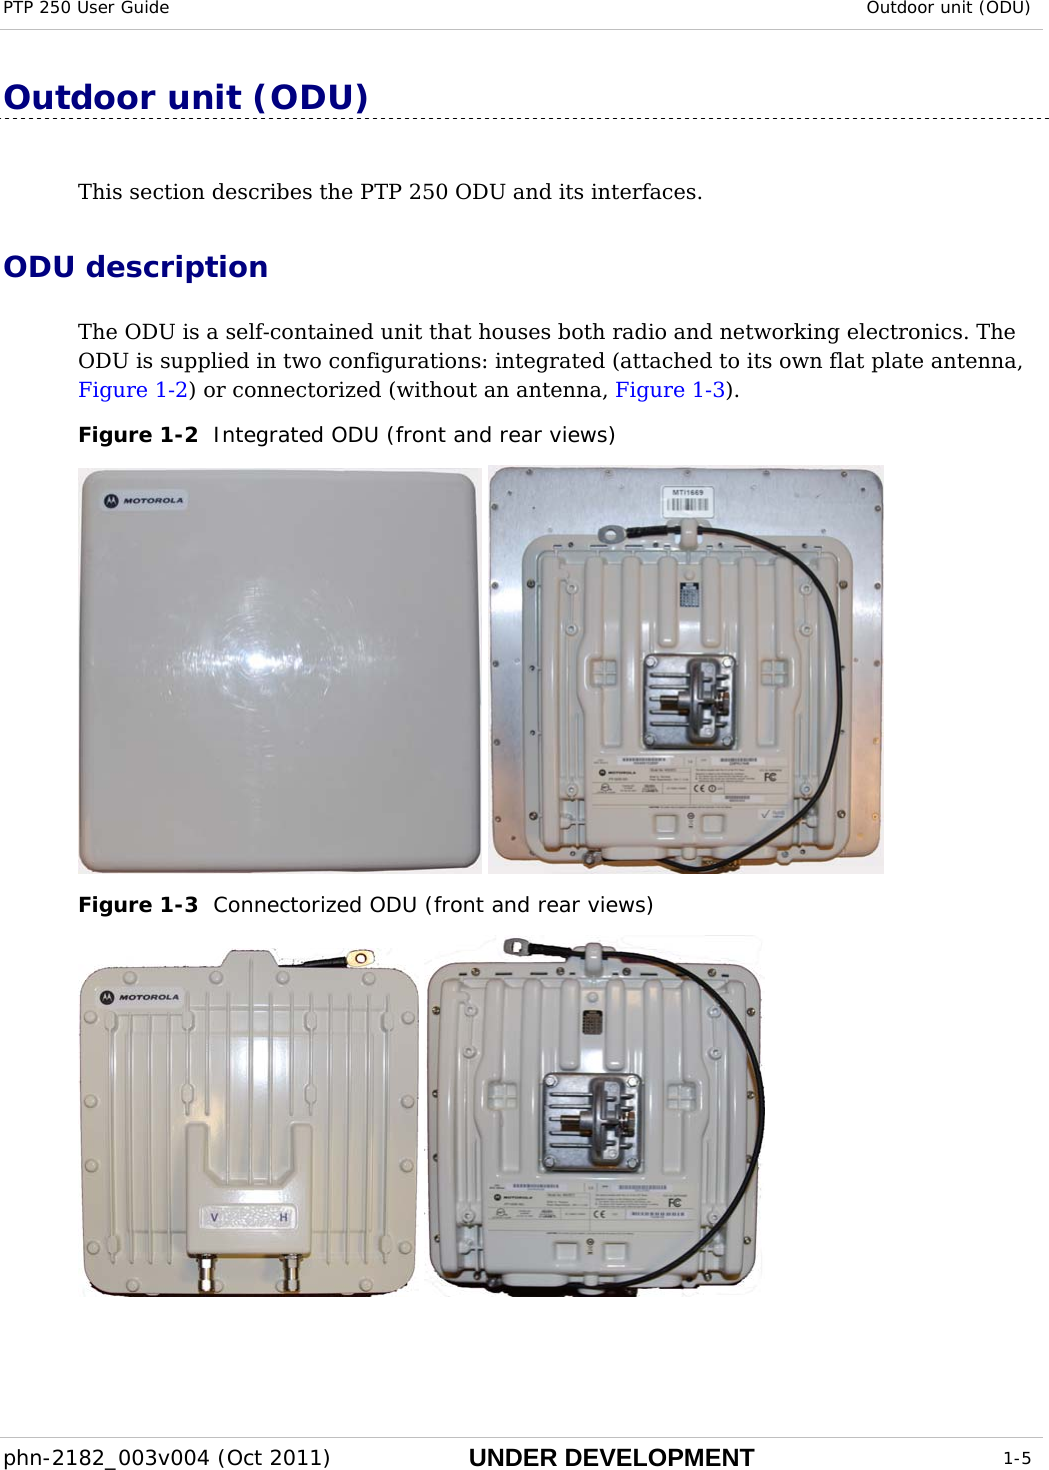 PTP 250 User Guide  Outdoor unit (ODU)  phn-2182_003v004 (Oct 2011)  UNDER DEVELOPMENT  1-5  Outdoor unit (ODU) This section describes the PTP 250 ODU and its interfaces. ODU description The ODU is a self-contained unit that houses both radio and networking electronics. The ODU is supplied in two configurations: integrated (attached to its own flat plate antenna, Figure 1-2) or connectorized (without an antenna, Figure 1-3). Figure 1-2  Integrated ODU (front and rear views)   Figure 1-3  Connectorized ODU (front and rear views)    